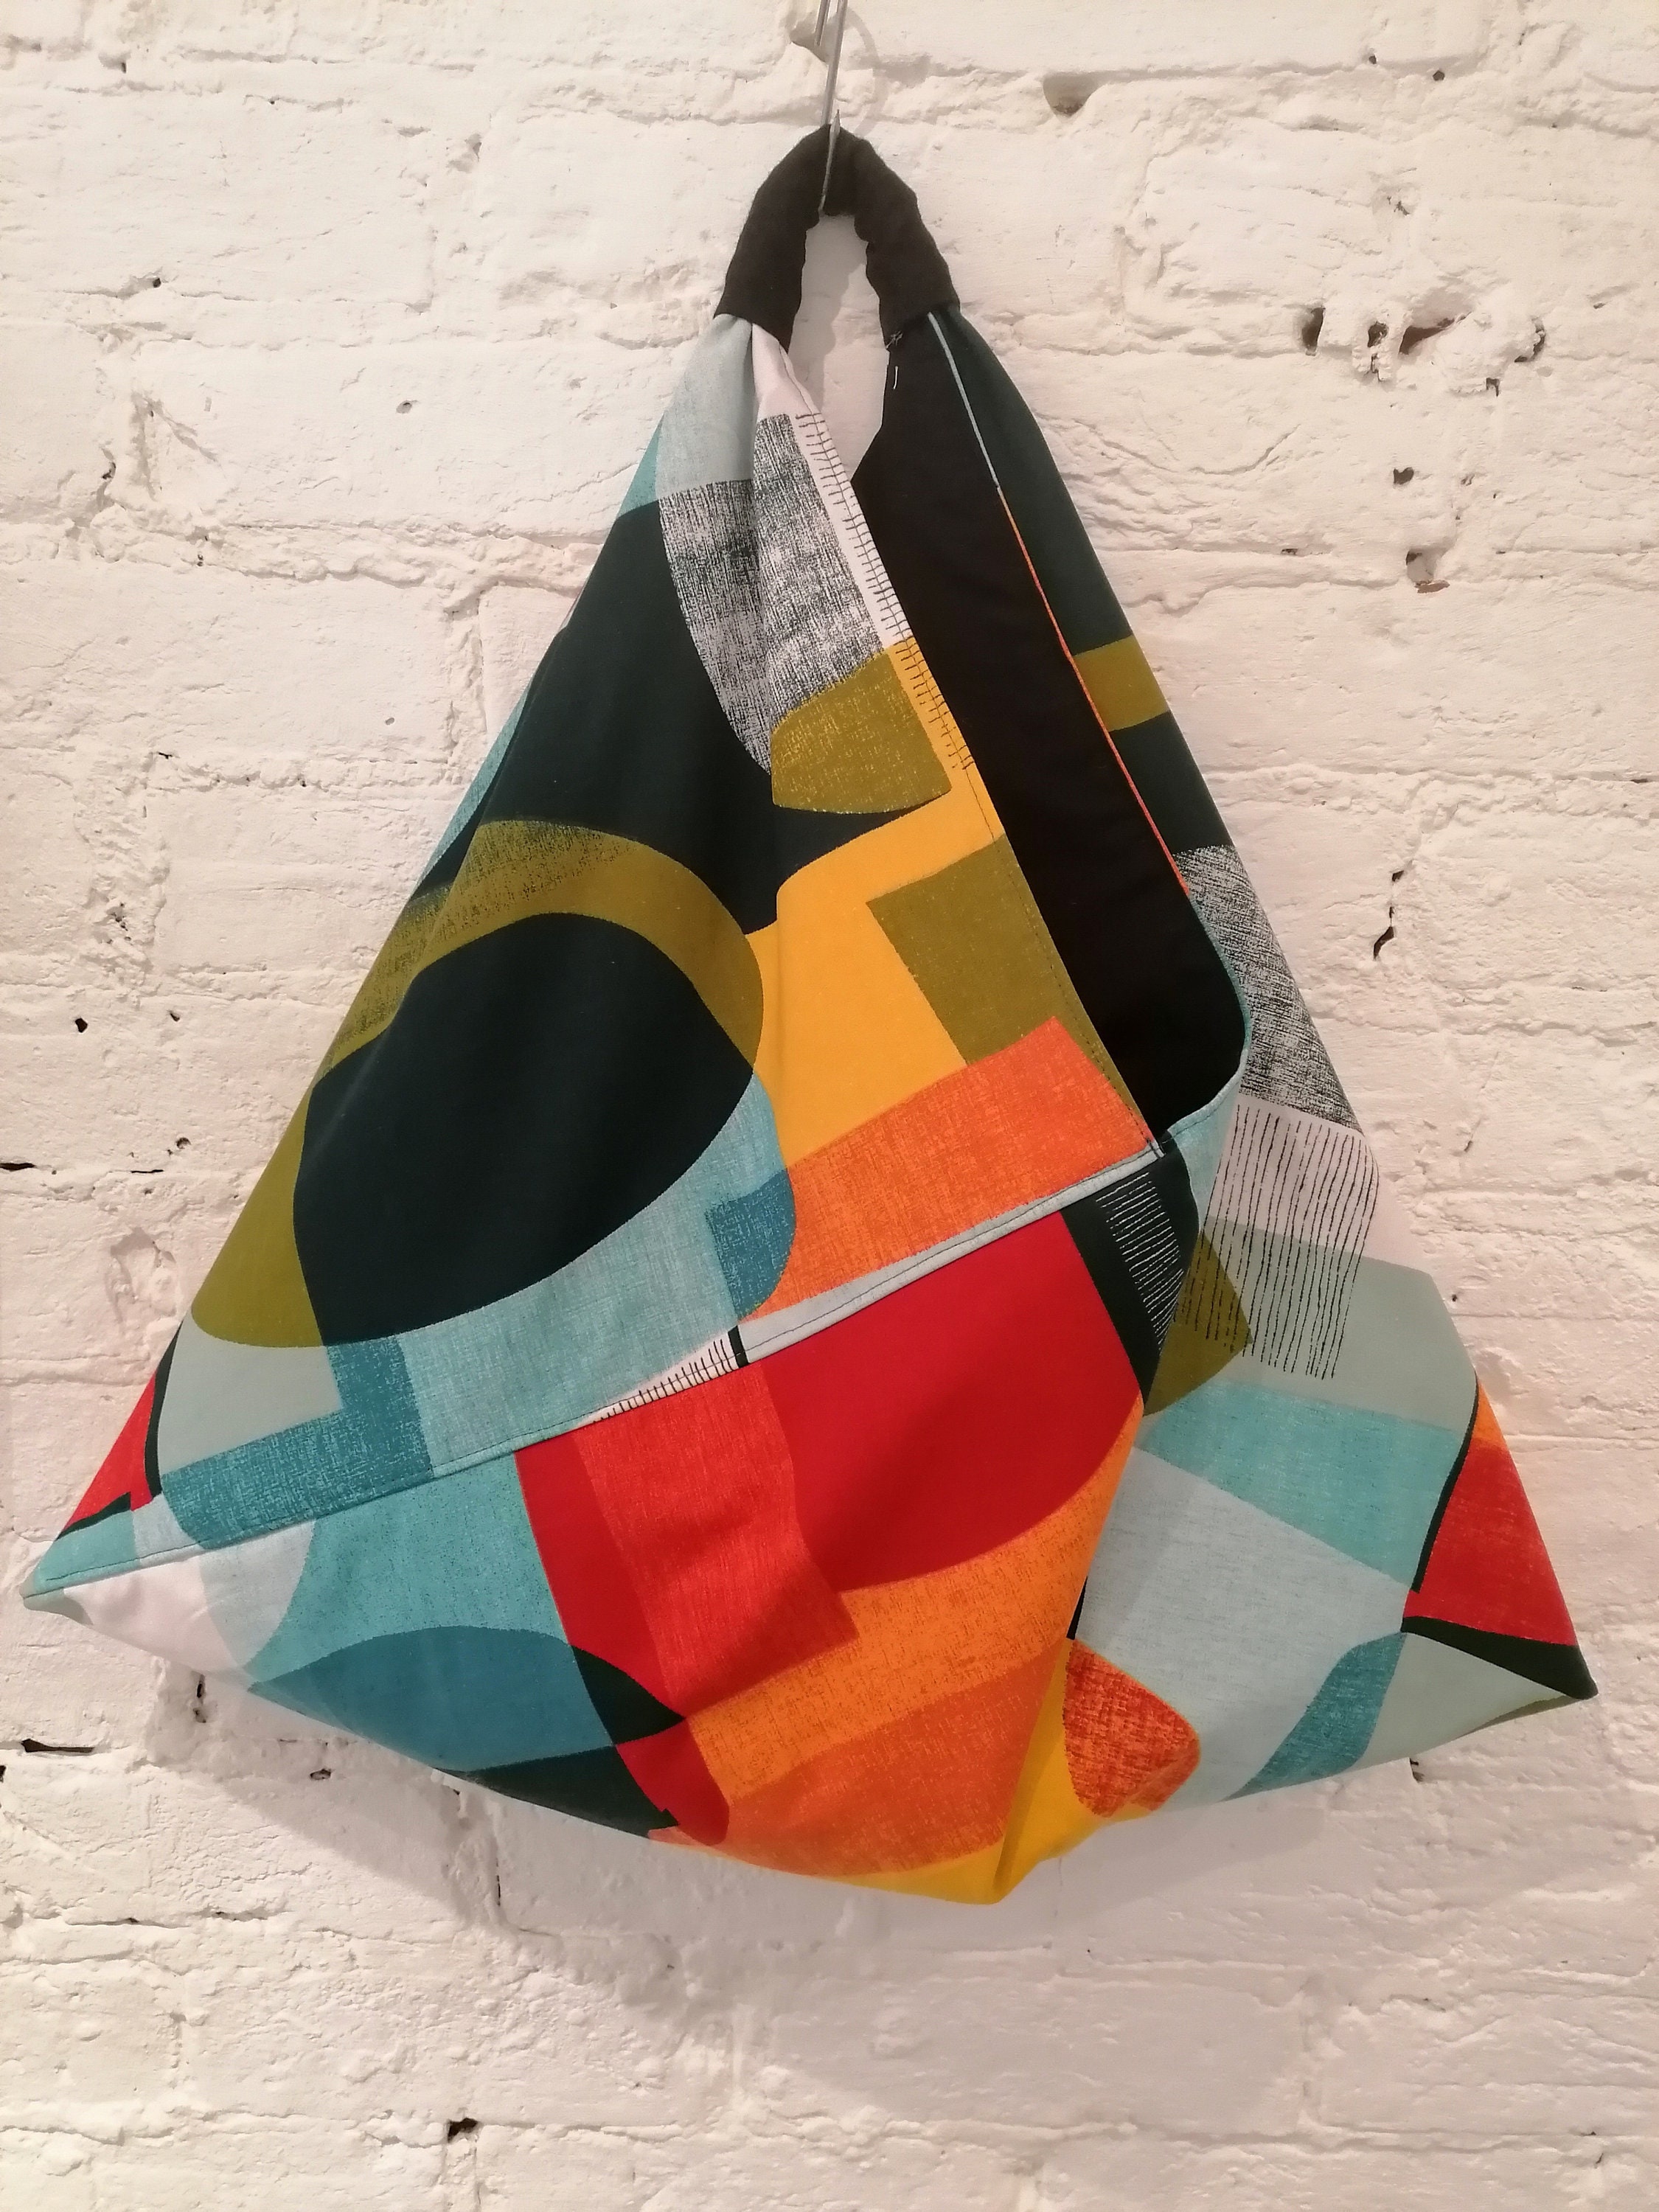 Origami Tote Bag - How to fold an Origami Tote Bag